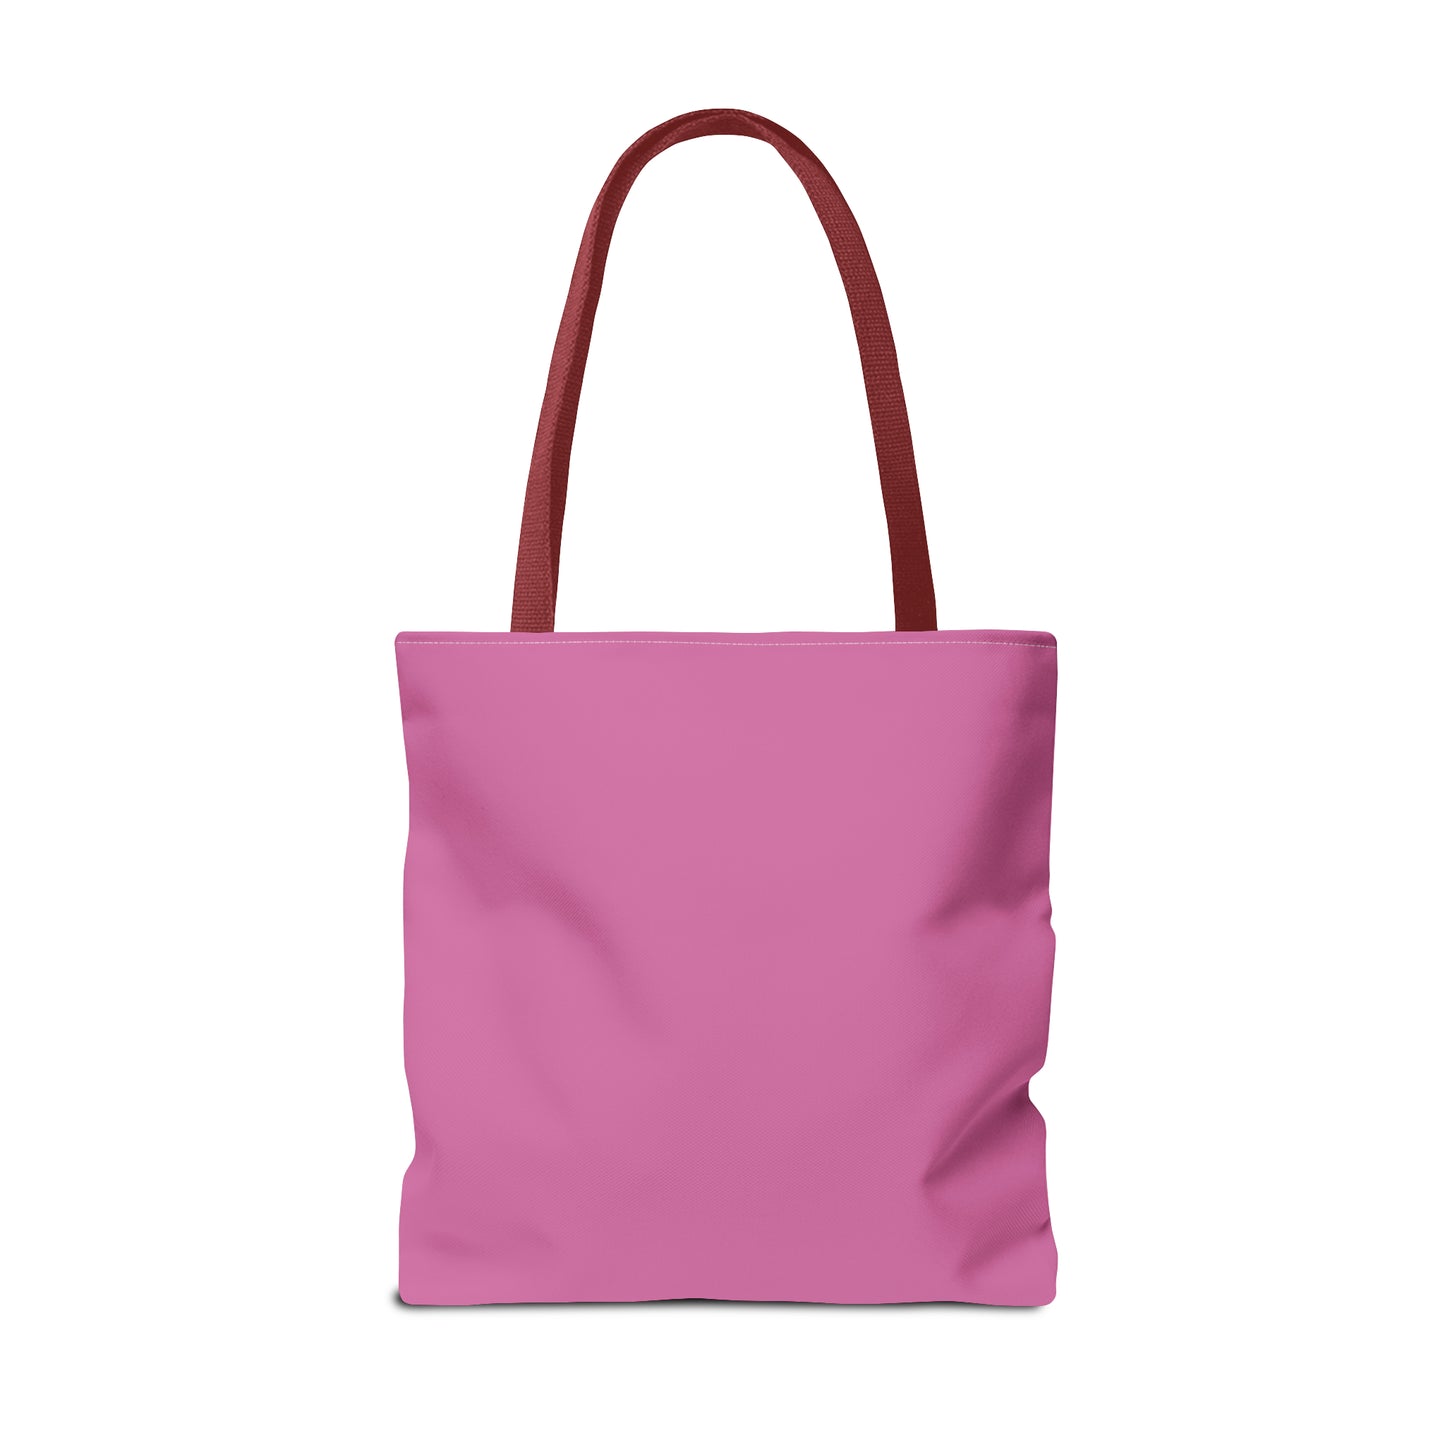 Shadow Daddy Book Club Tote in Pink